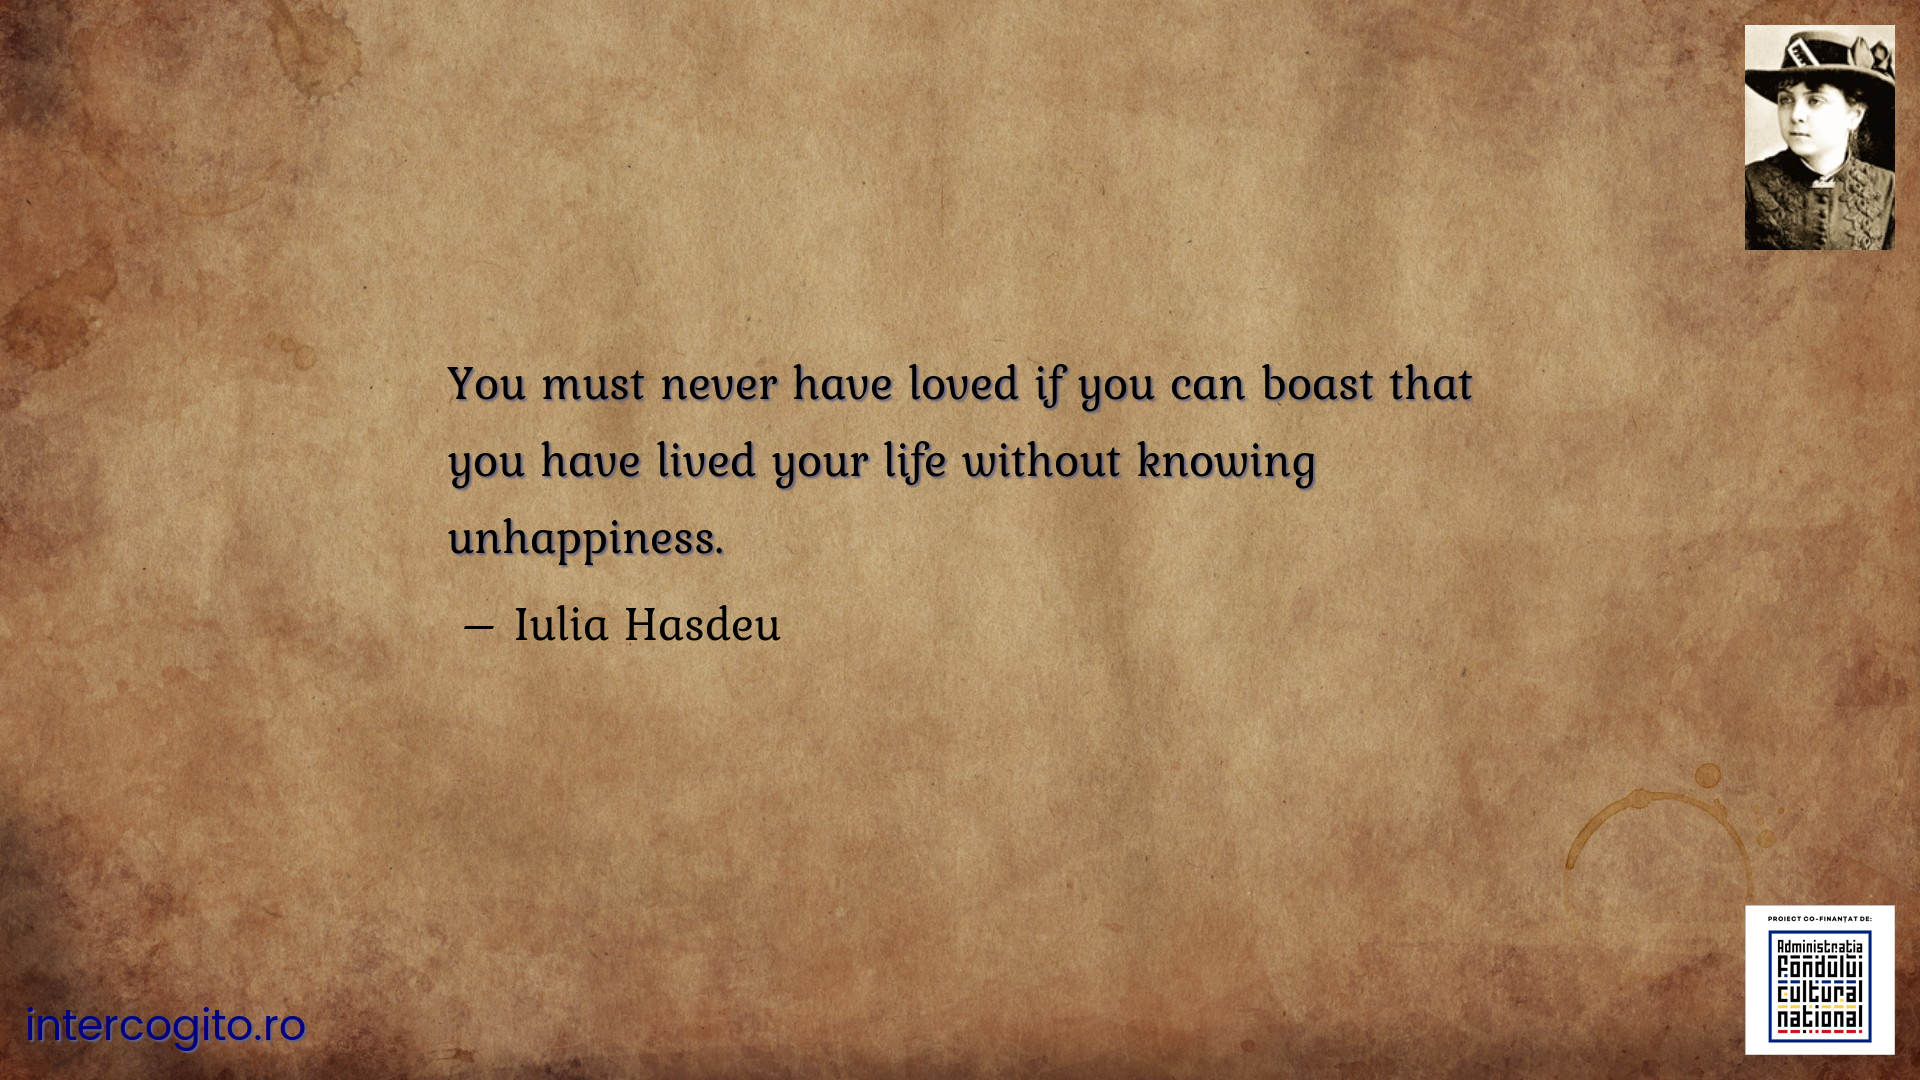 You must never have loved if you can boast that you have lived your life without knowing unhappiness.